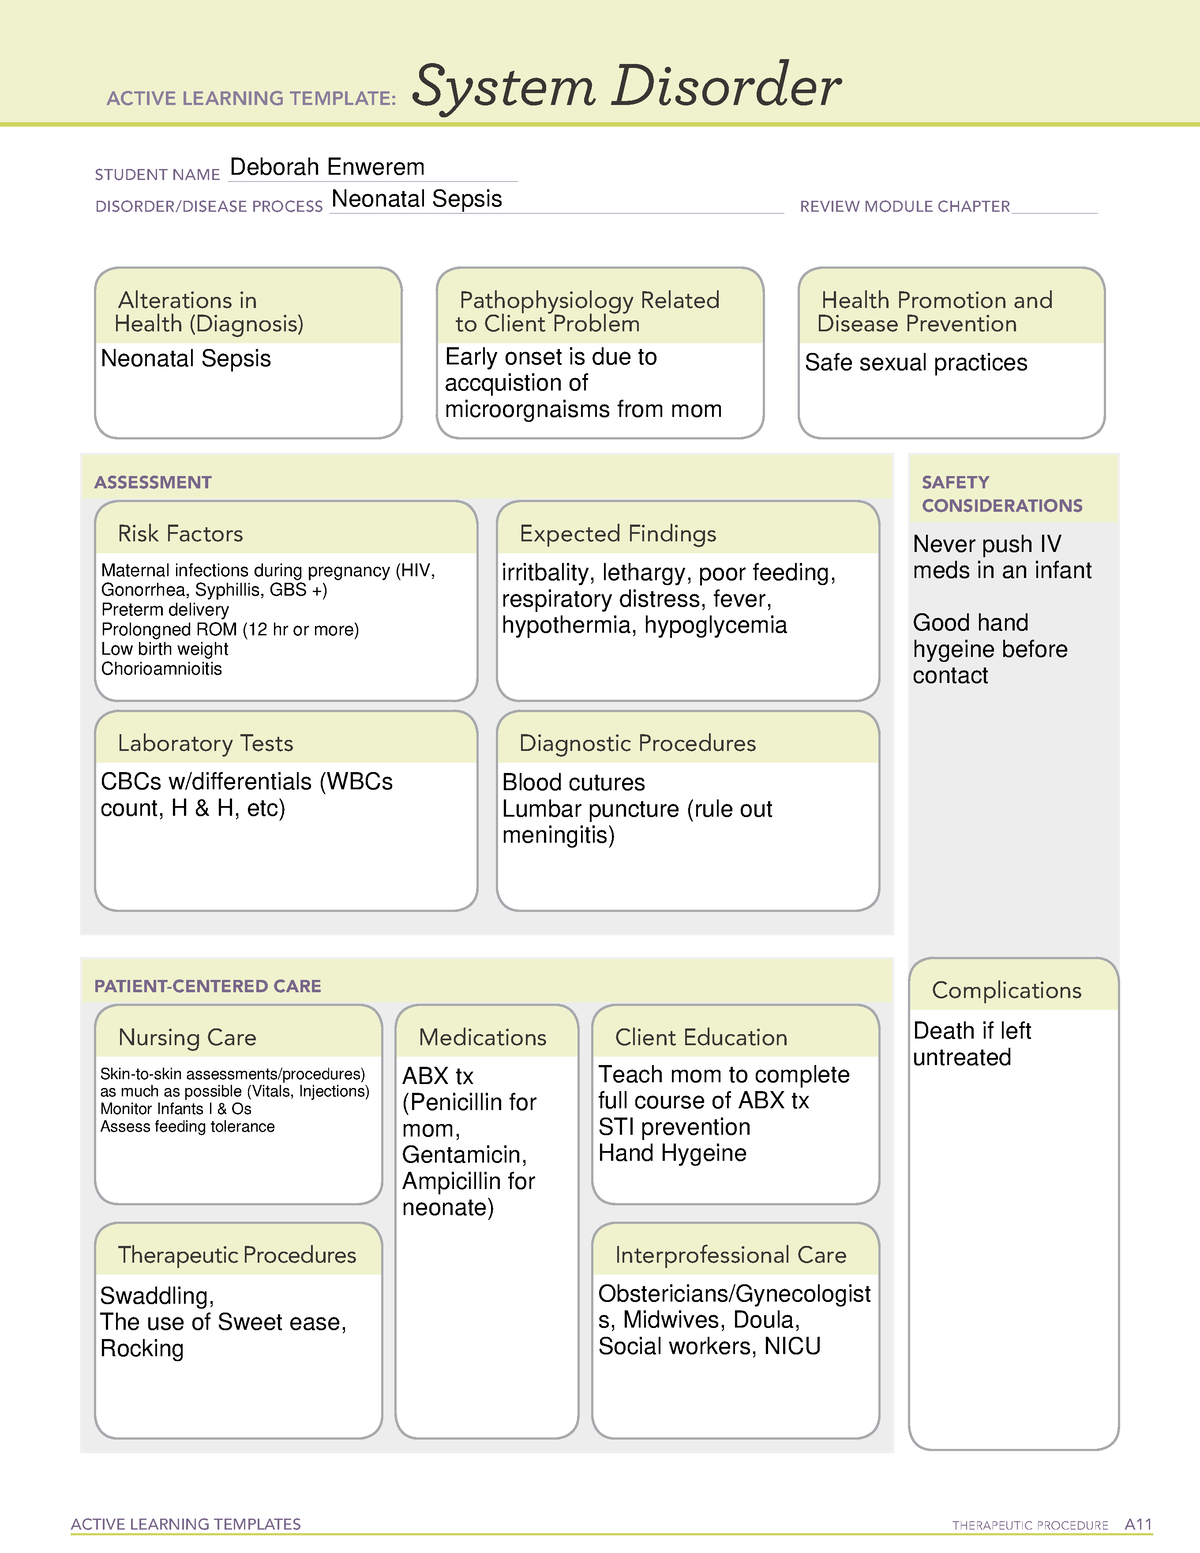 Neonatal Sepsis System Disorders ACTIVE LEARNING TEMPLATES